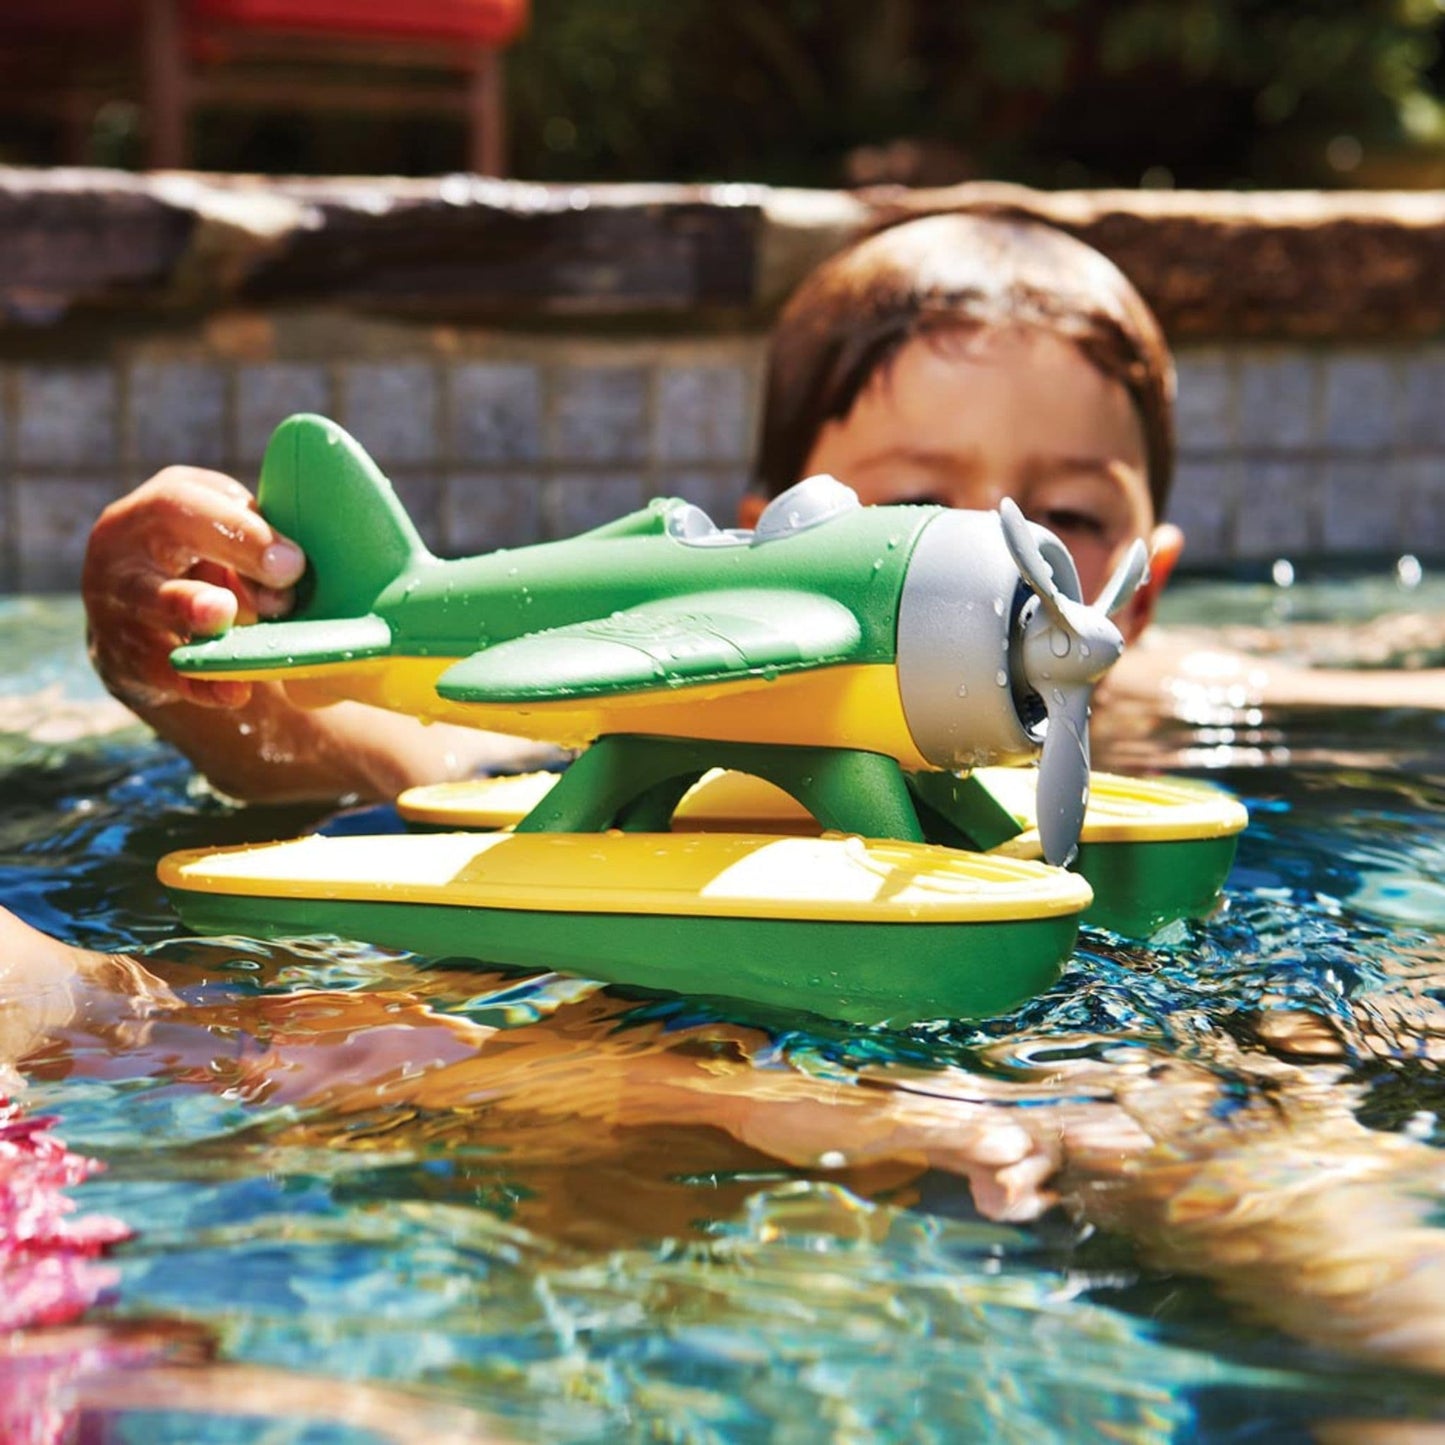 Green Toys Seaplane - eco bath toy made from recycled plastic